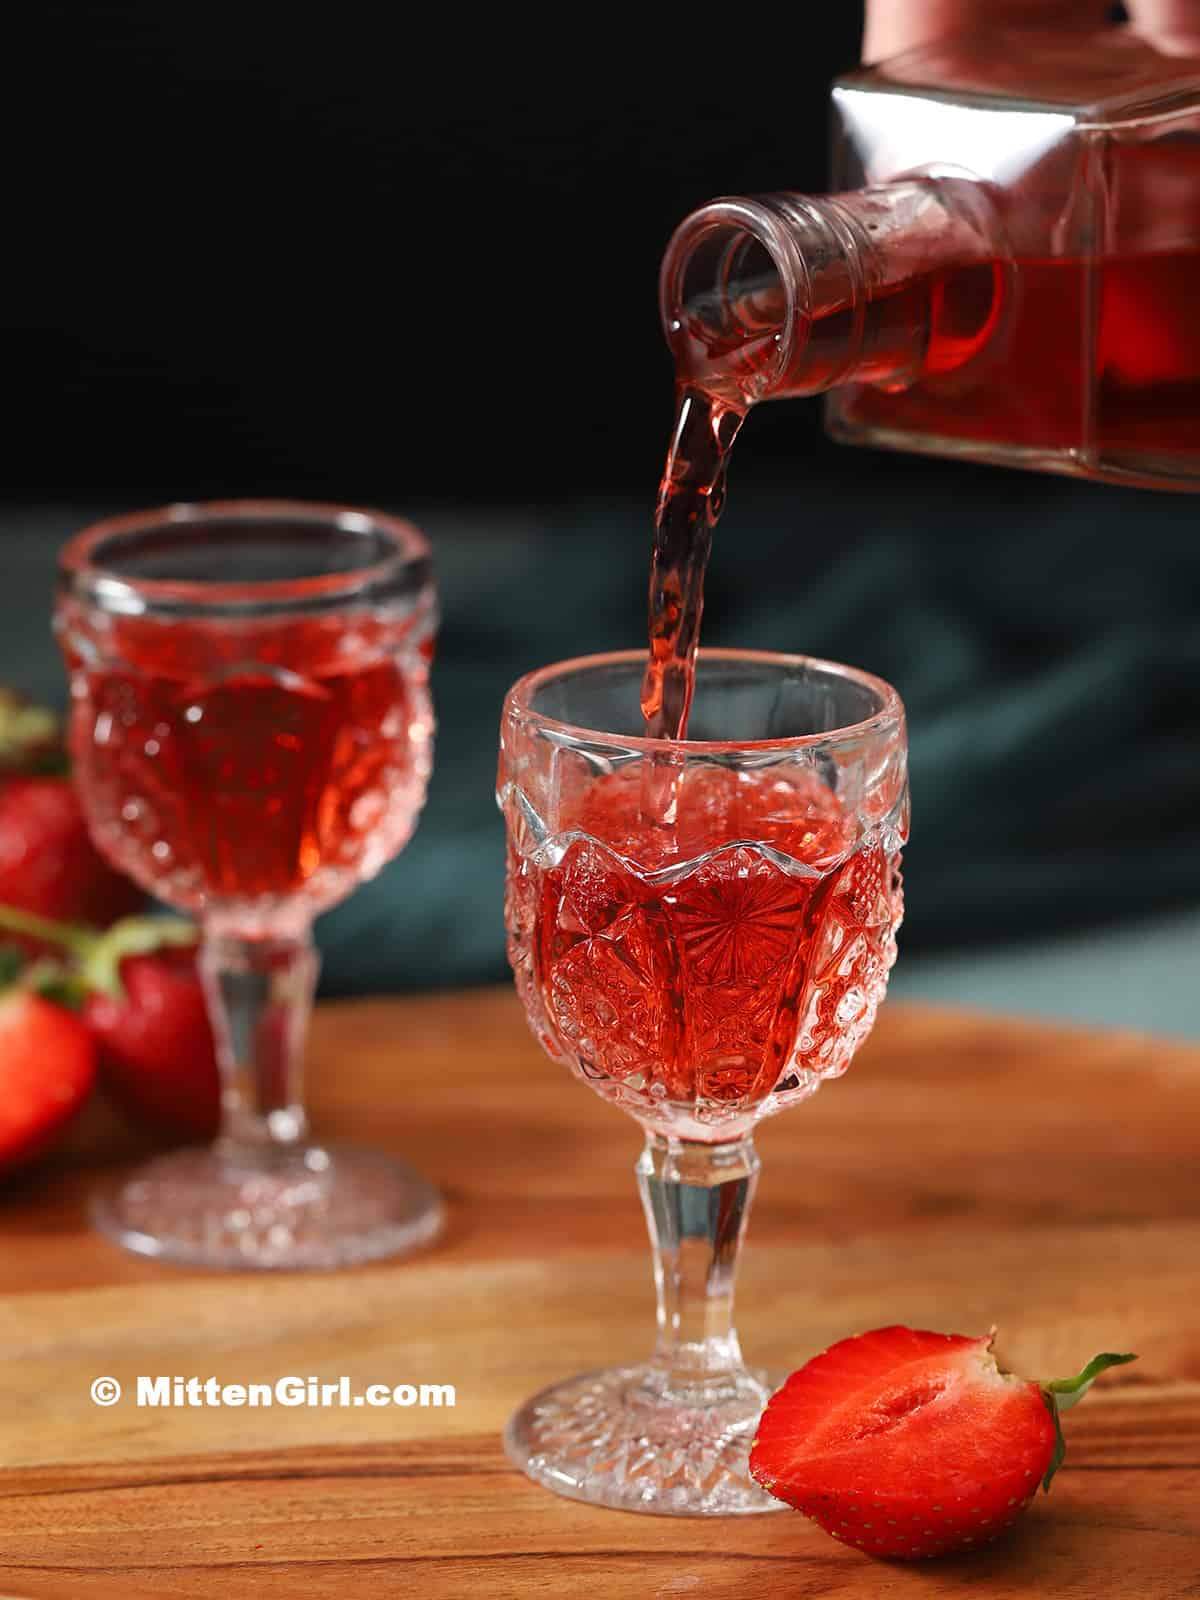 Strawberry infused vodka being poured into a small glass.